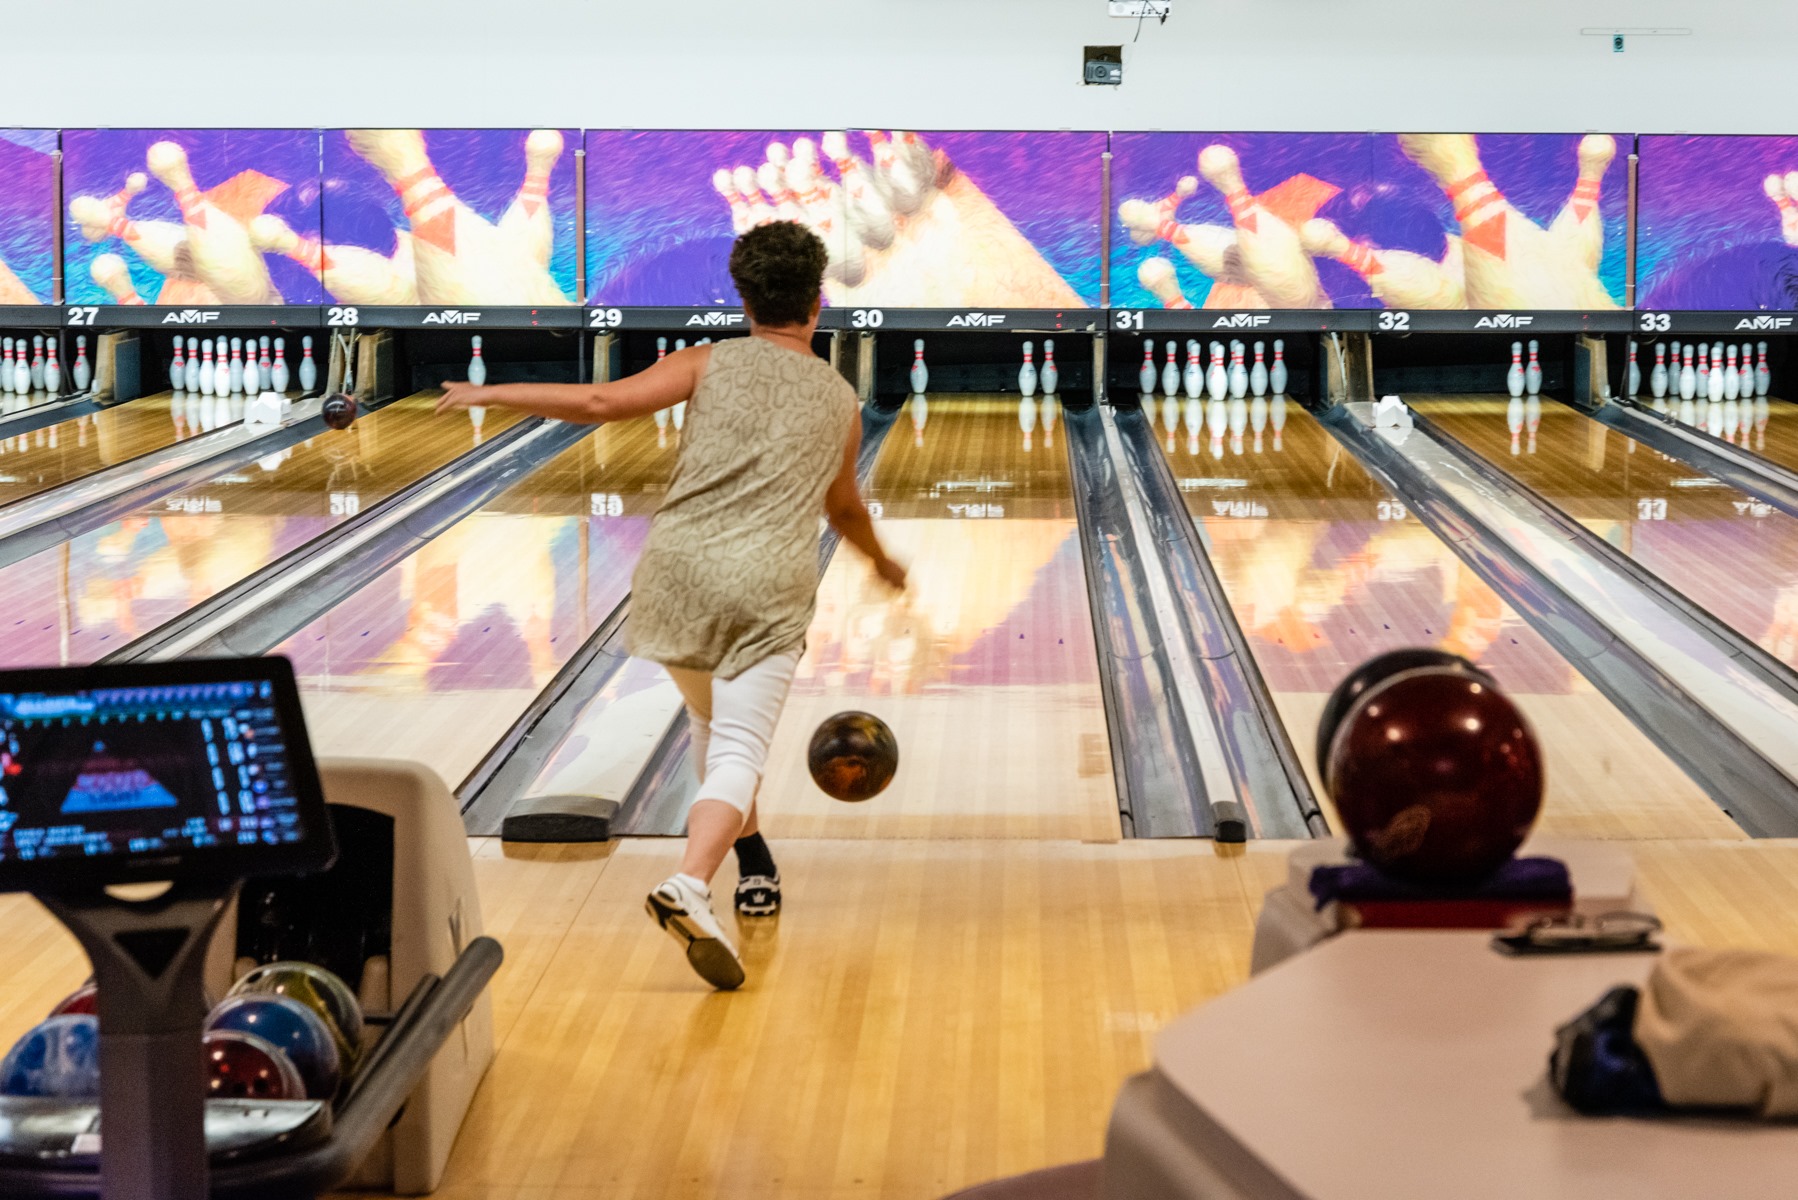 Striking Up Fun: 10 Compelling Reasons to Host Your Kid’s Next Birthday Party at the Bowling Alley!